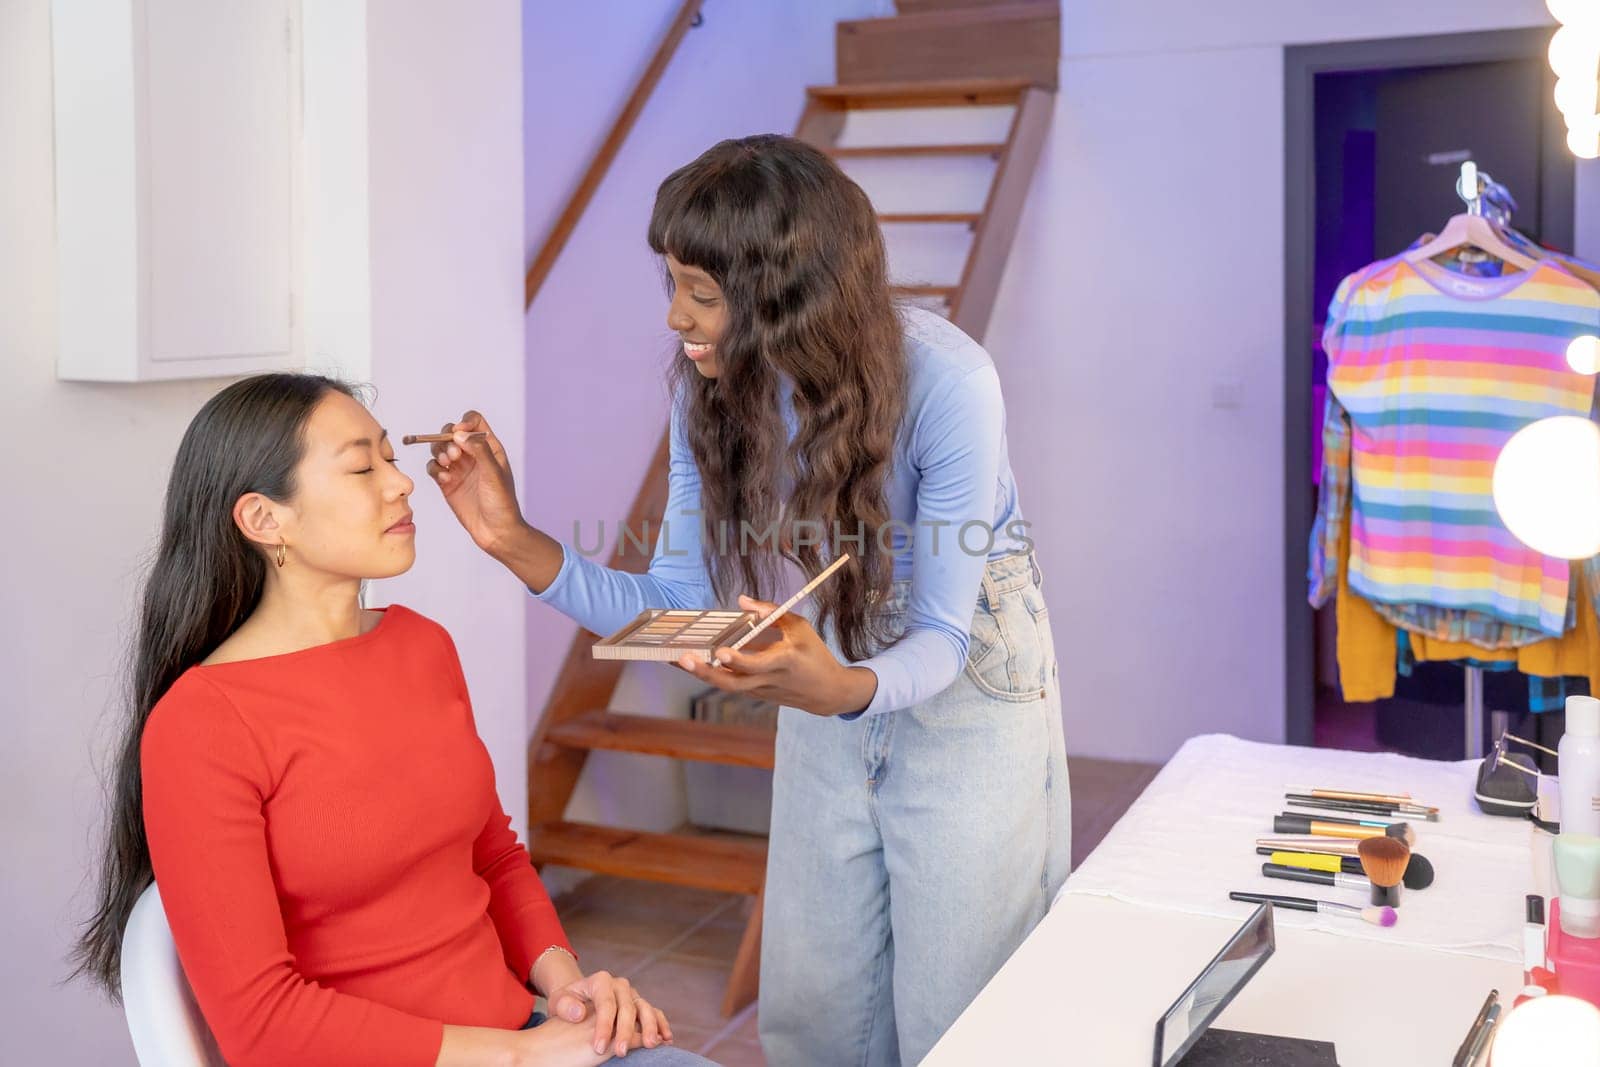 Makeup artist applying makeup to woman's face in front of a mirror. People together having fun. High quality photo